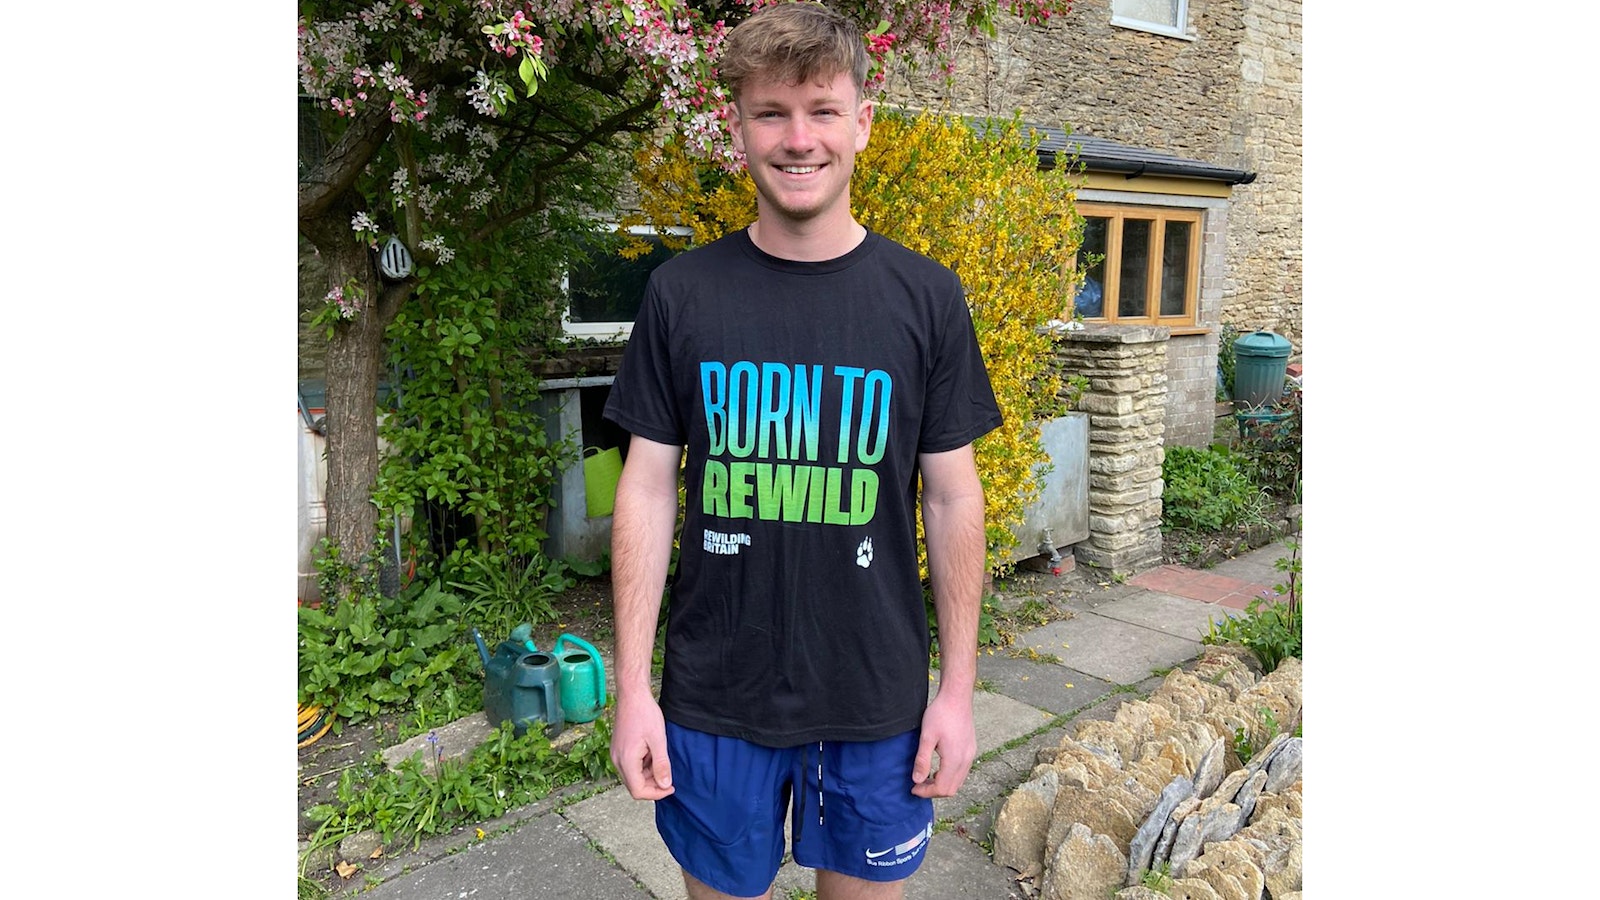 Alex ran a 50k ultramarathon and raised £1070! “I chose to run for Rewilding Britain because it represents an opportunity, at a time where we have all been deprived of our outdoor spaces, to give back to nature".